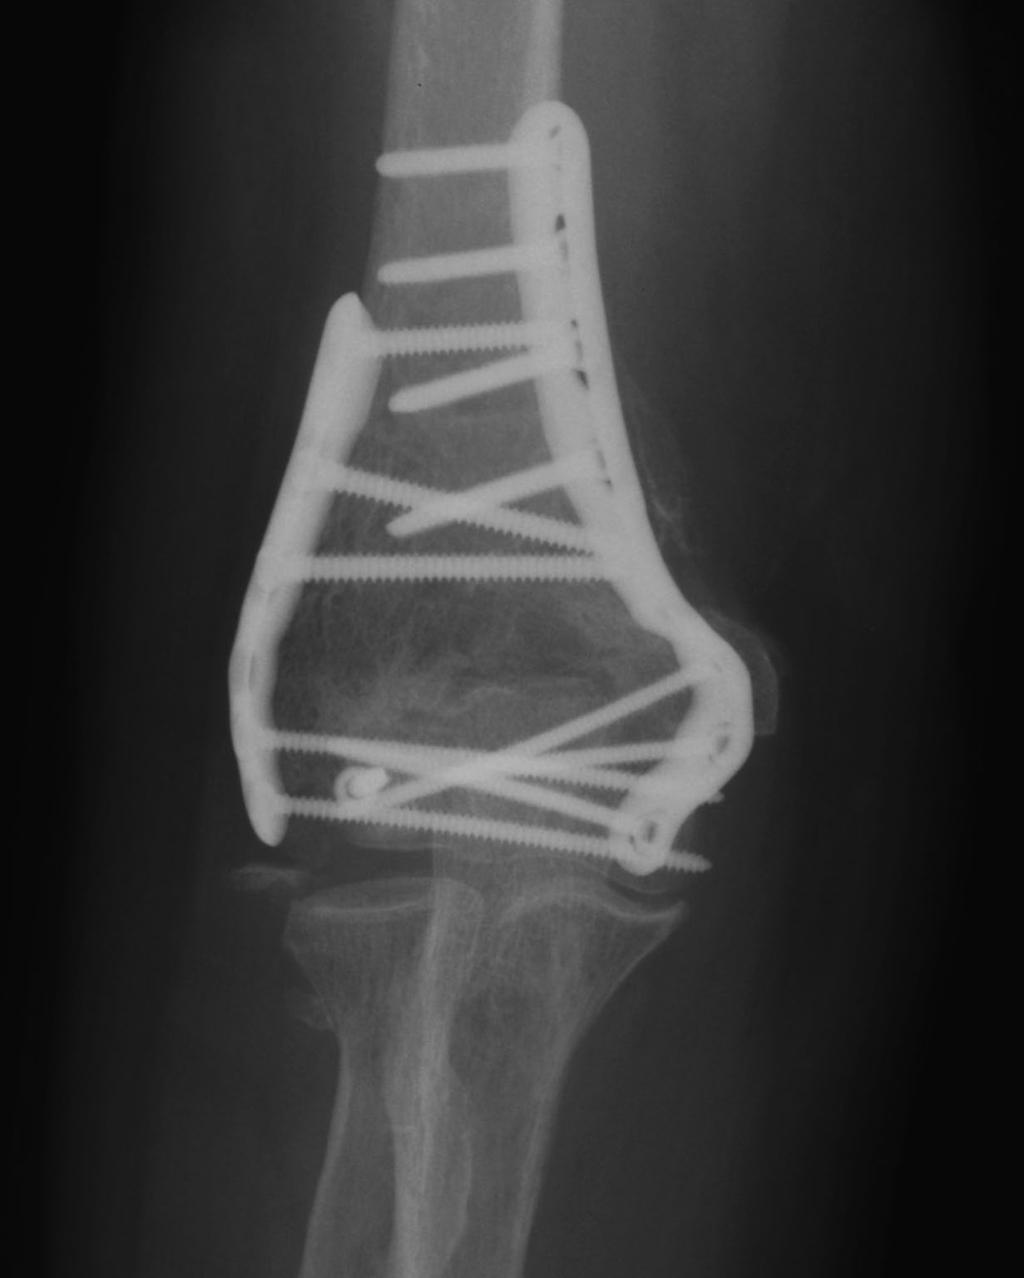 40 FIG. 8-C plates; one-third tubular plates are not strong enough for fixation of these complex fractures.